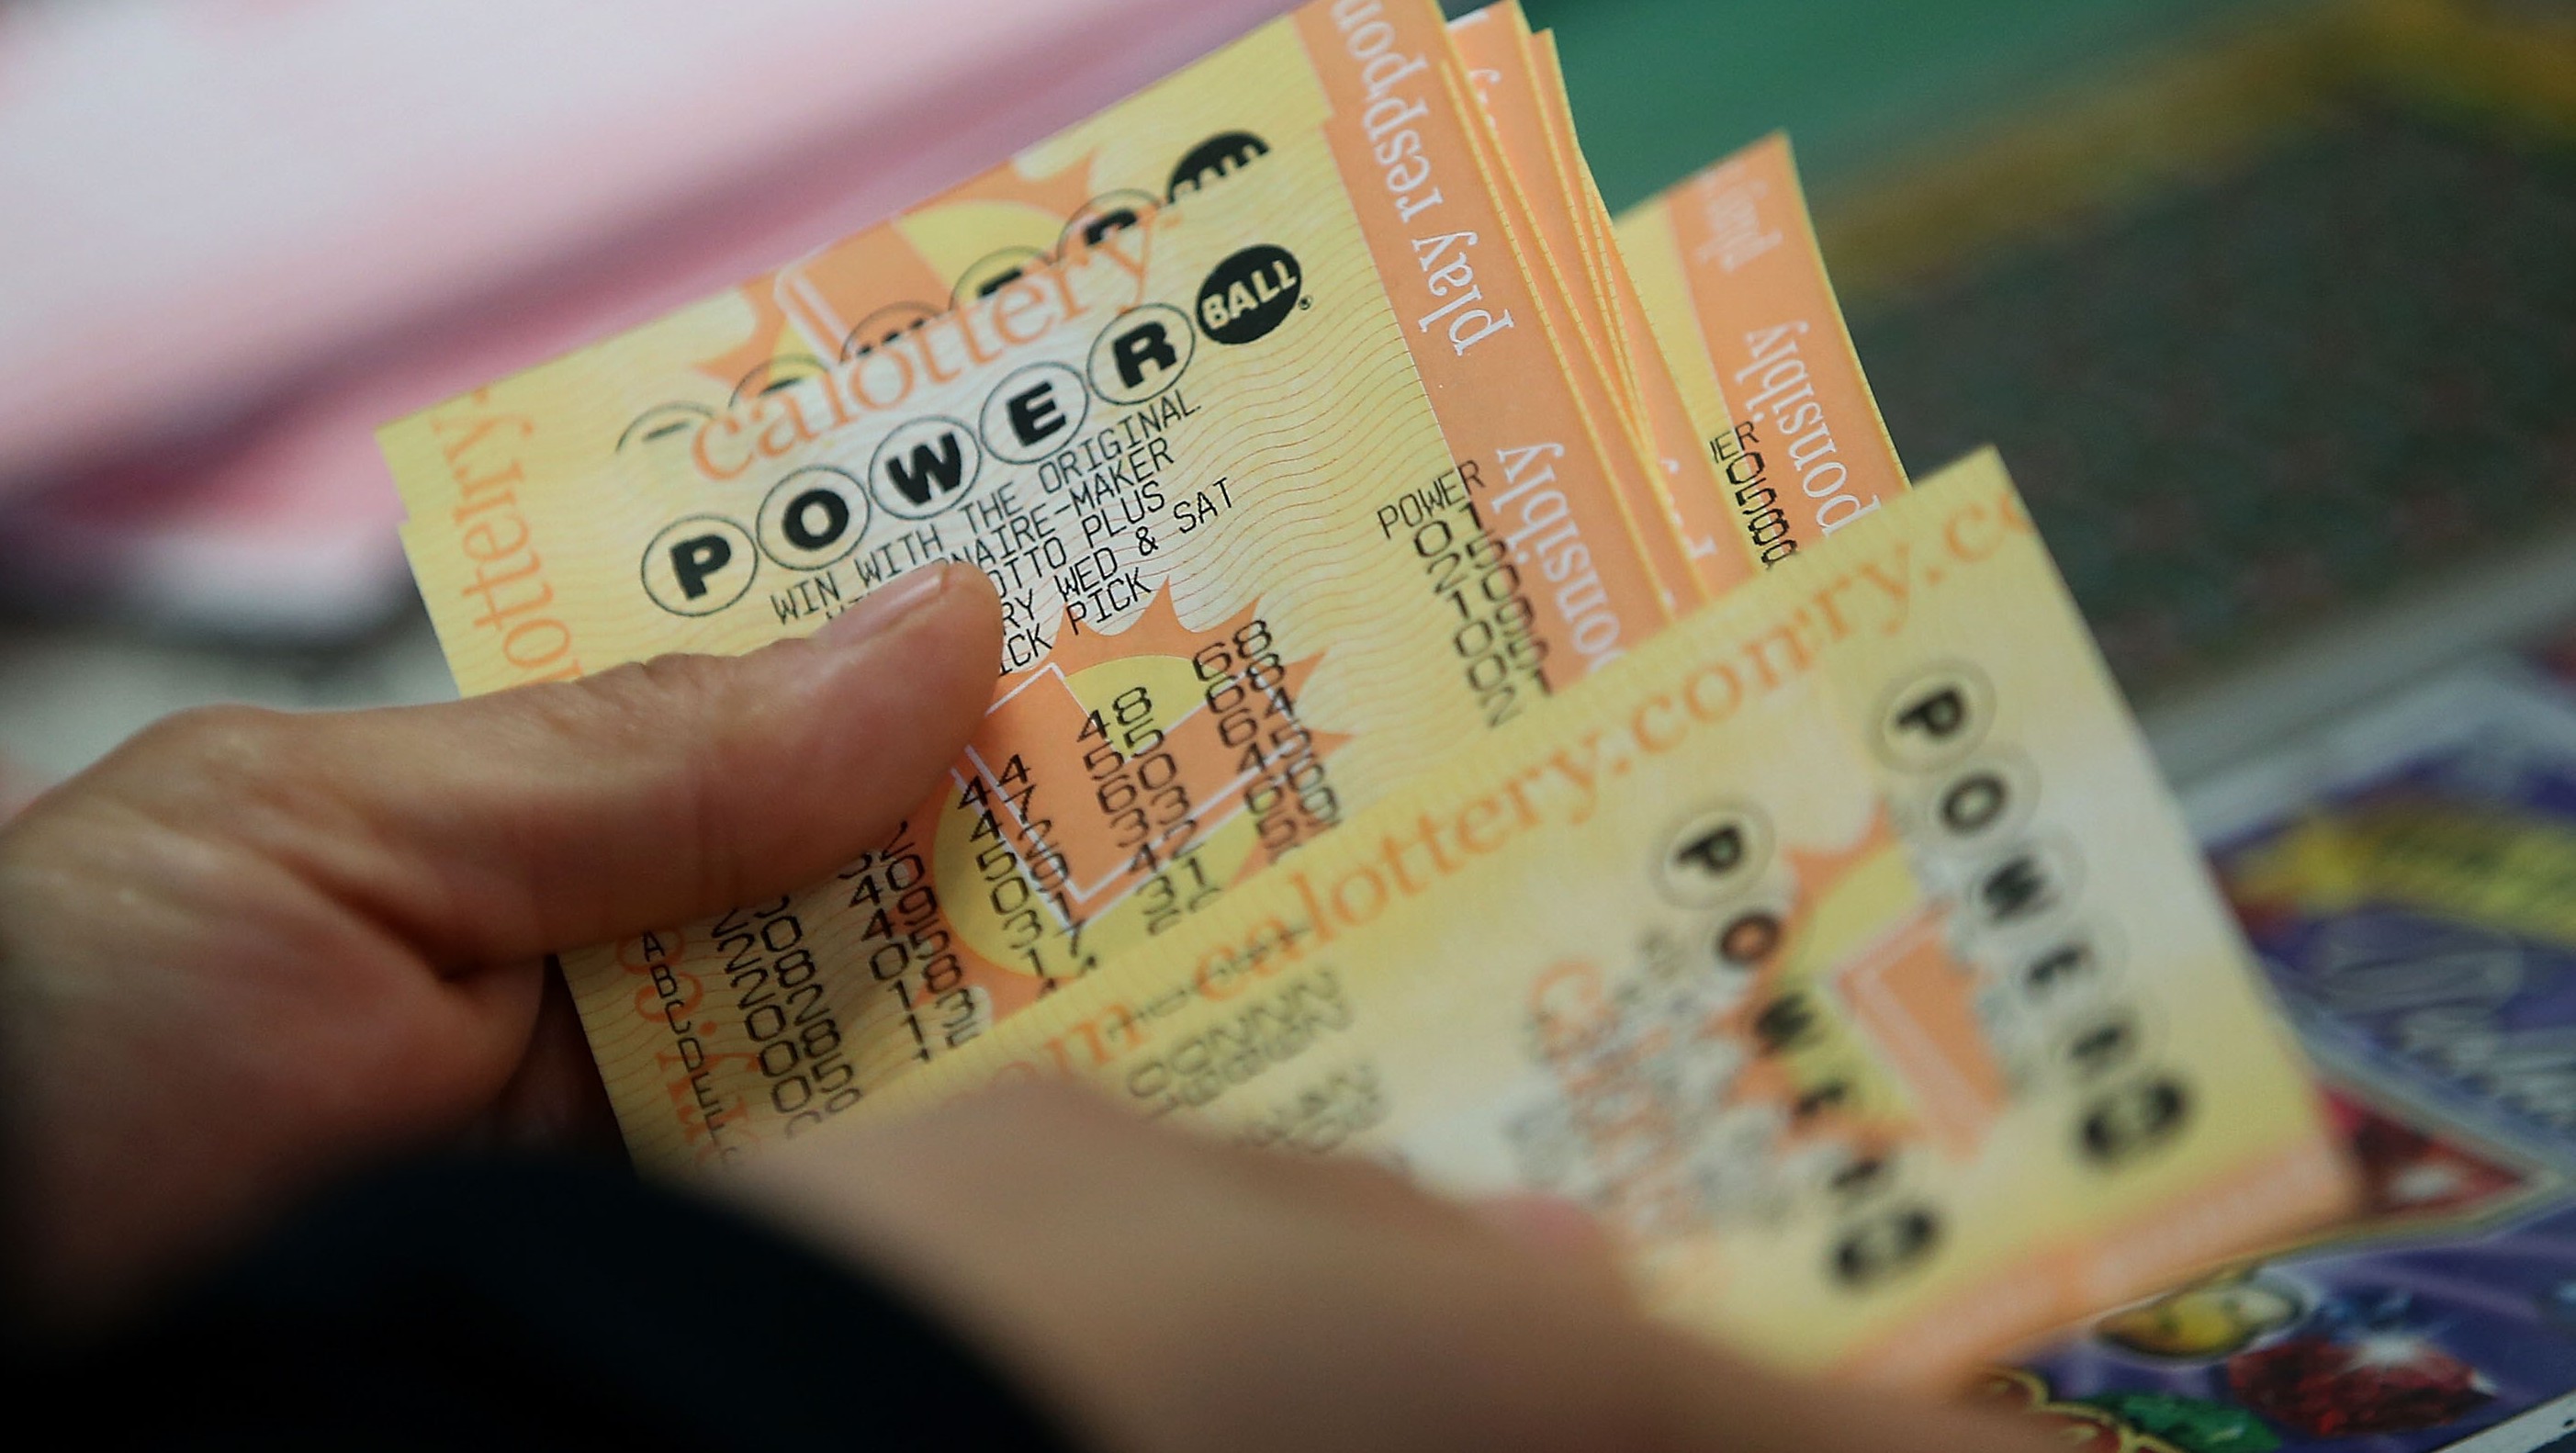 Powerball What TV Station Is the Drawing Tonight Jan 20?